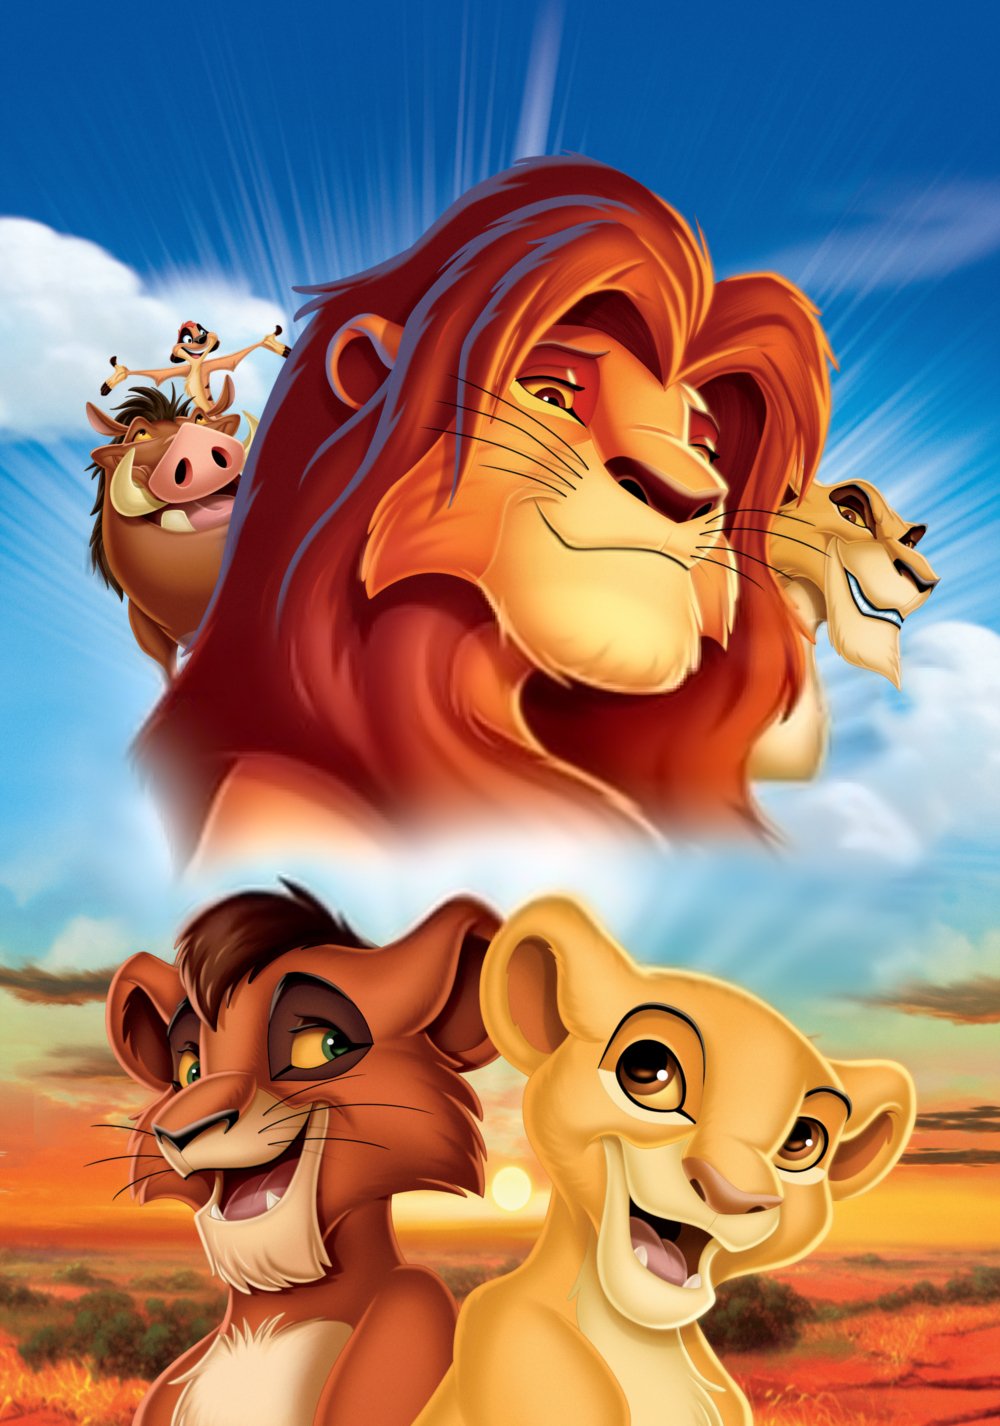 The Lion King 2: Simba's Pride Movie Poster - ID: 138078 - Image Abyss